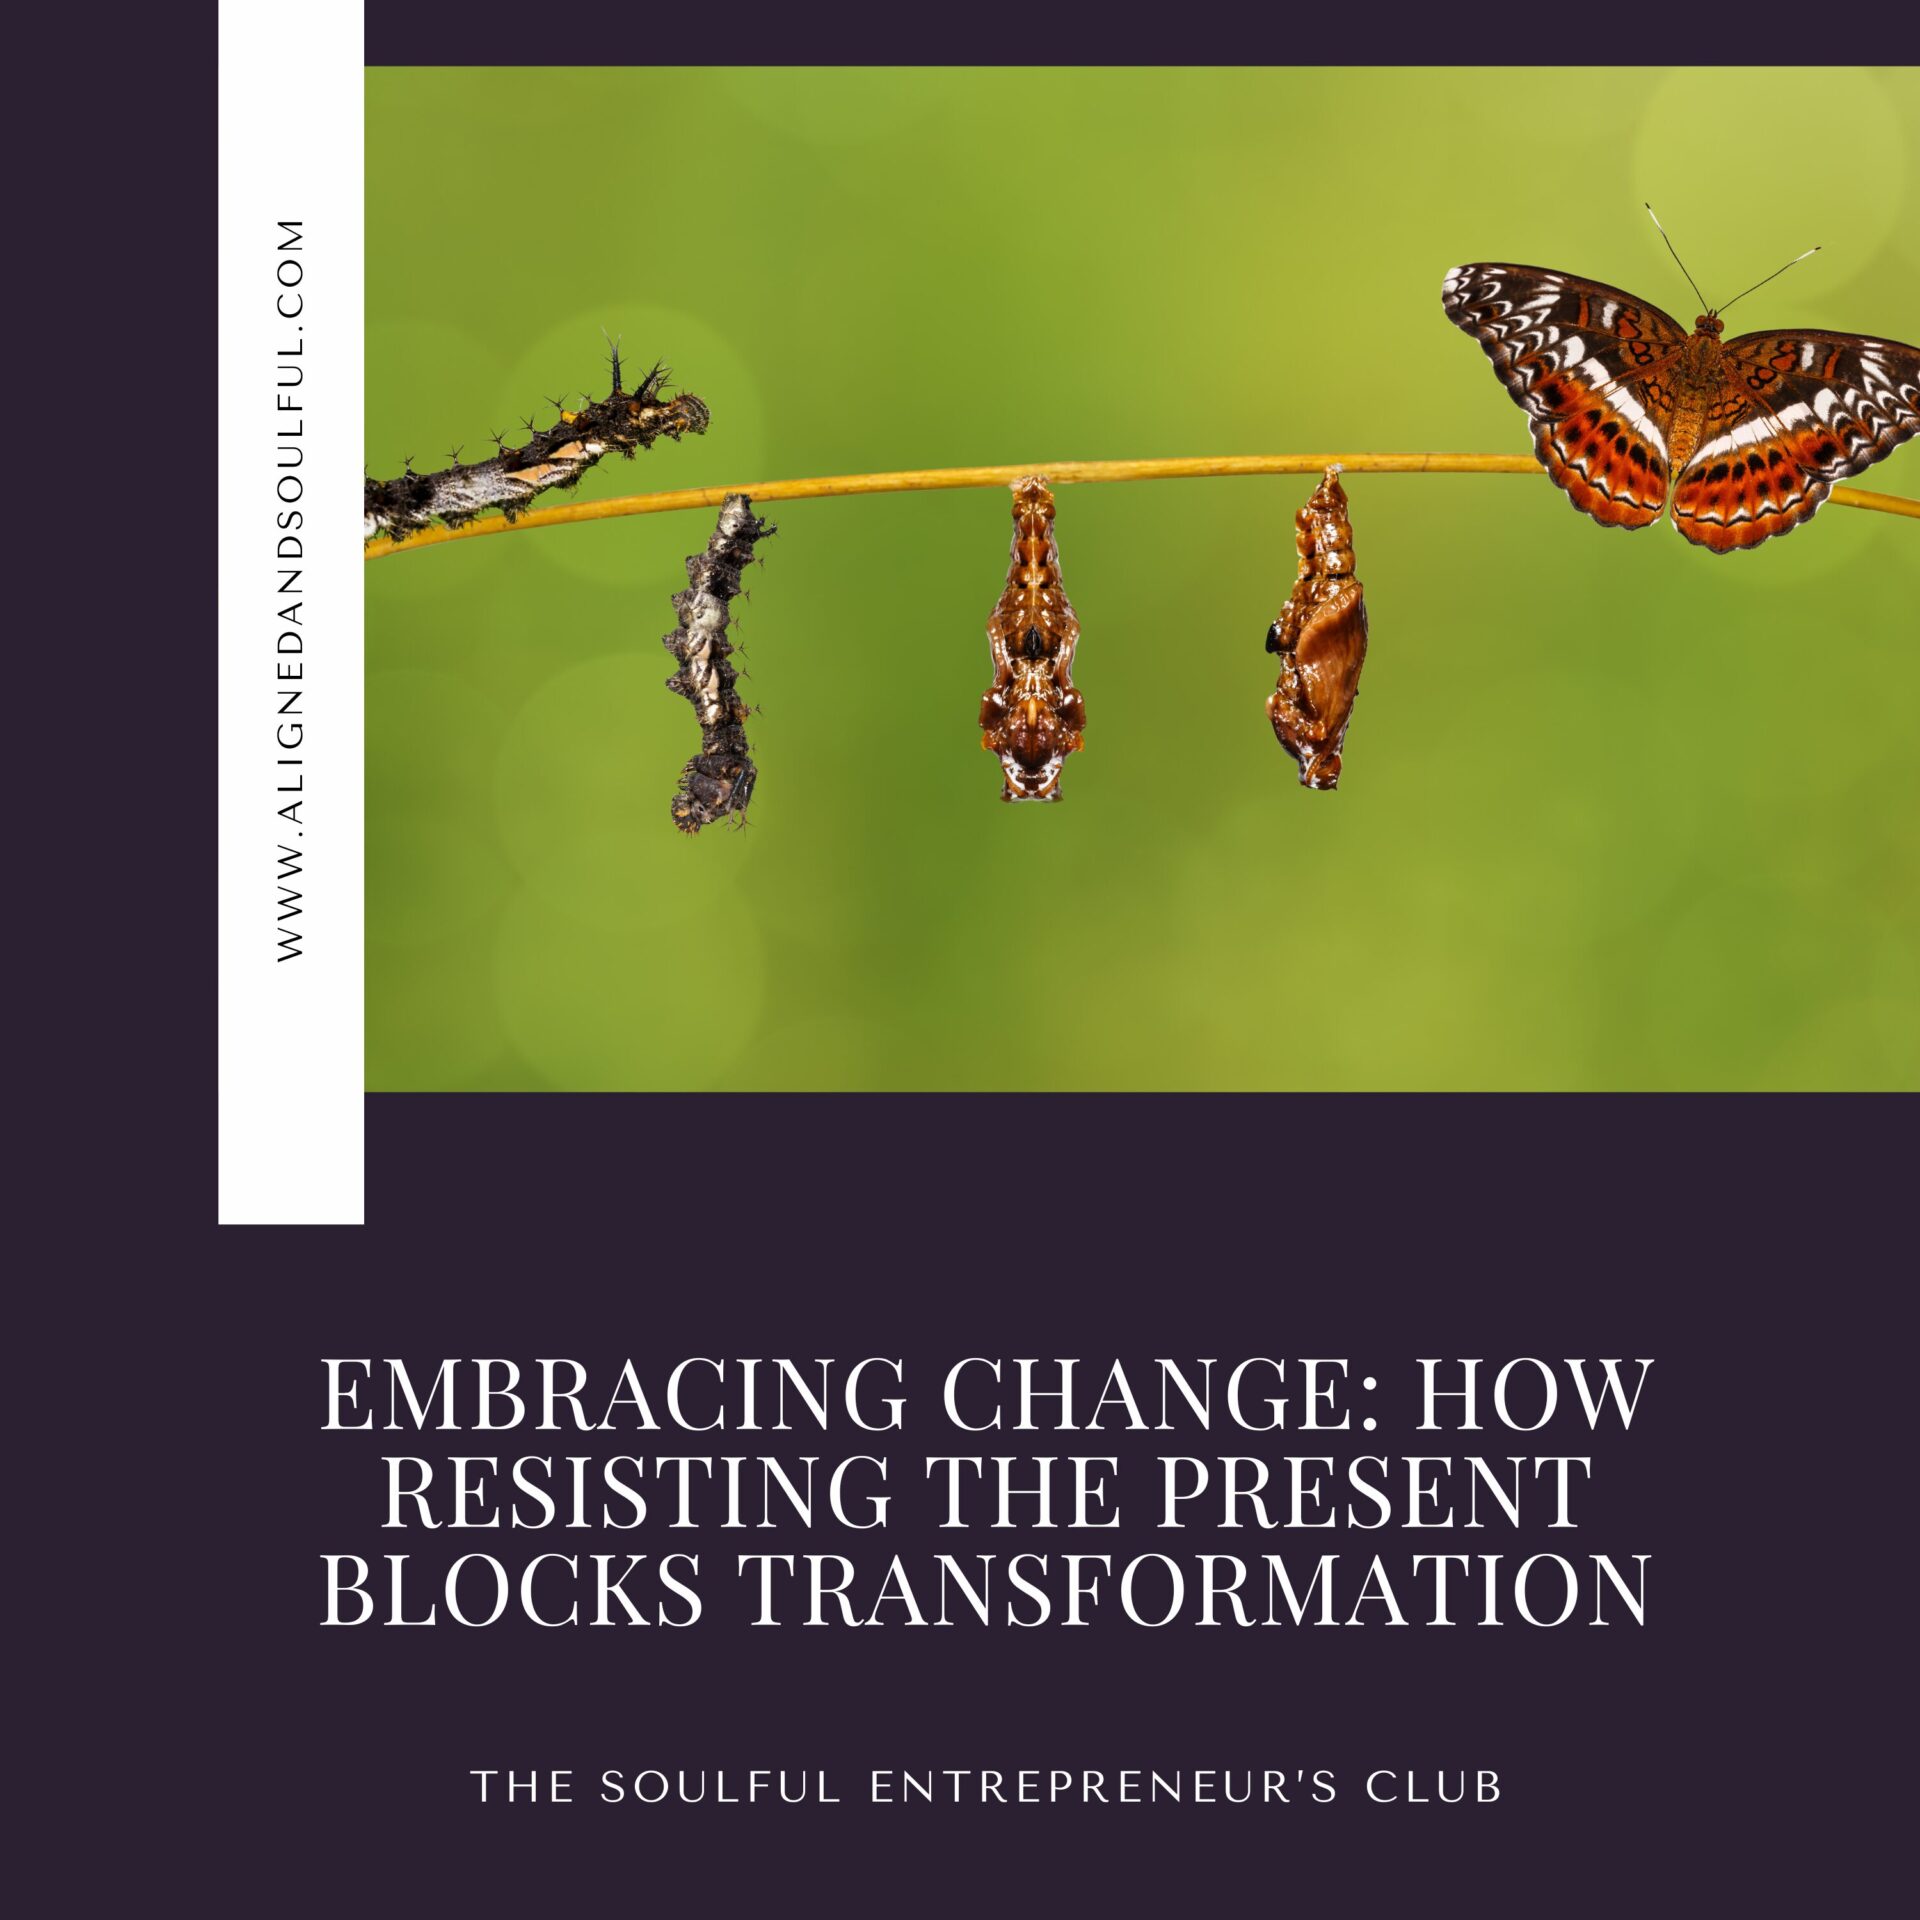 Embracing Change: How Resisting the Present Blocks Transformation